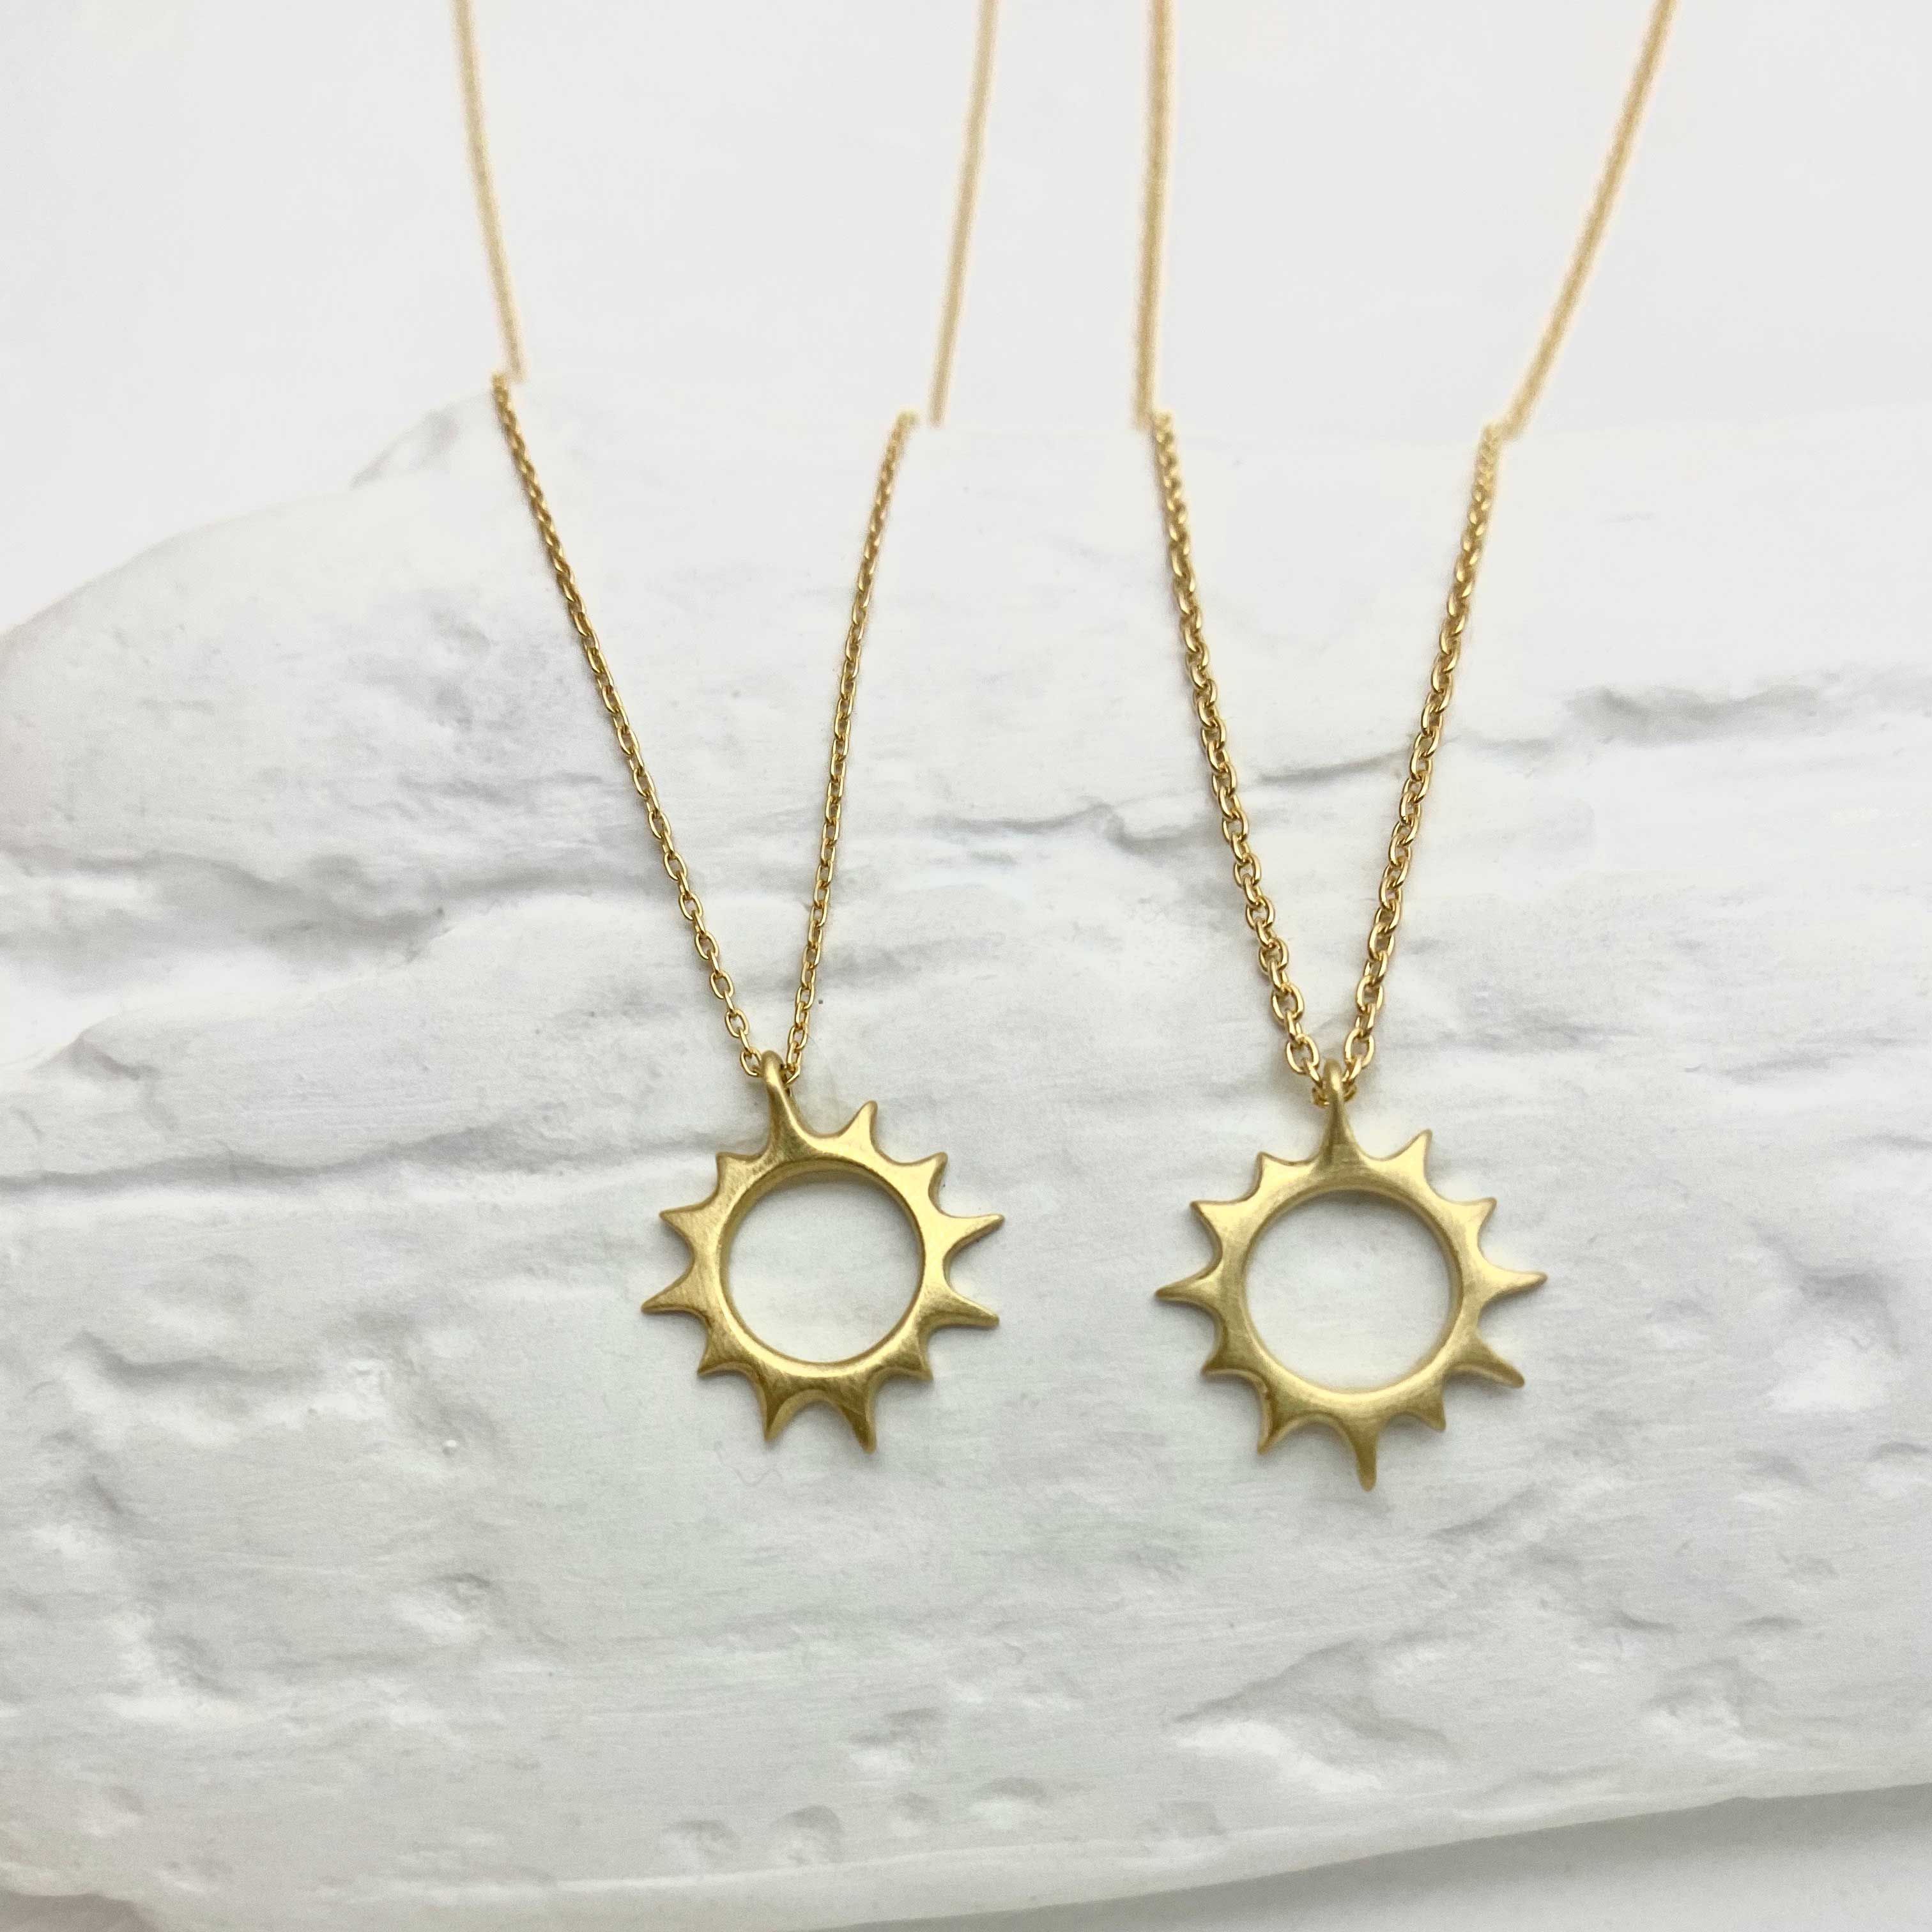 Large Golden Sun on a Thick Gold Chain (18k)